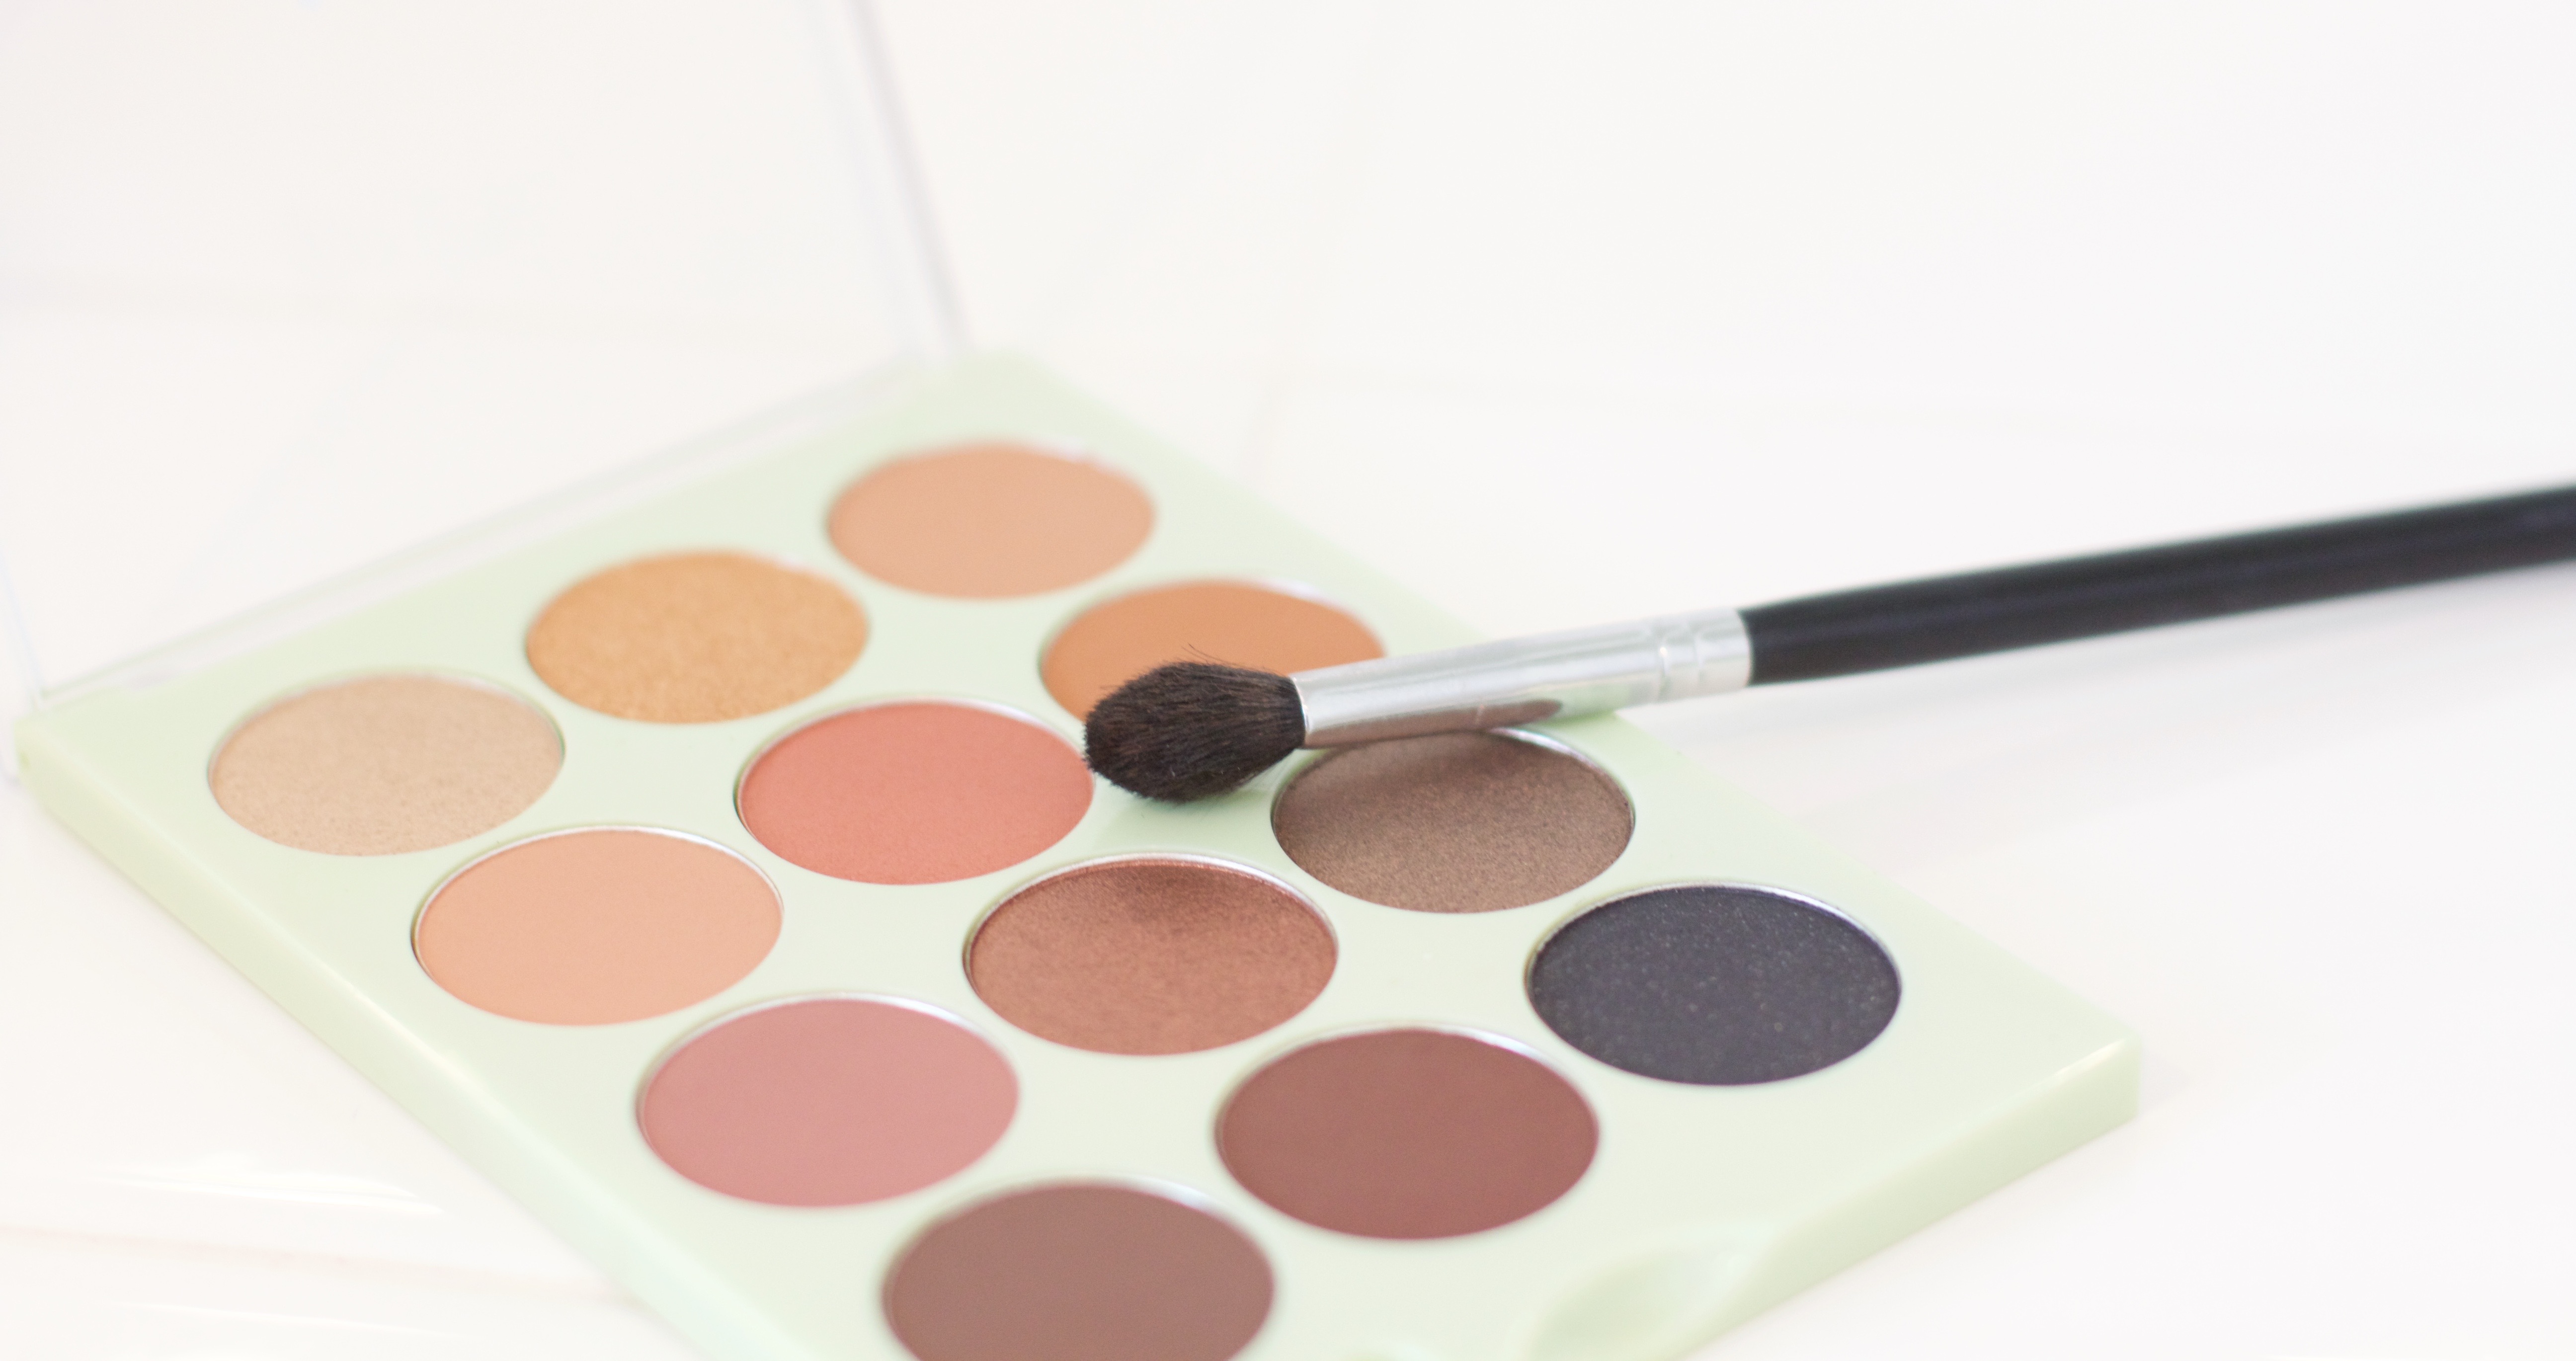 Pixi + ItsJudyTime Eye Shadow Palette Review It's Eye Time!